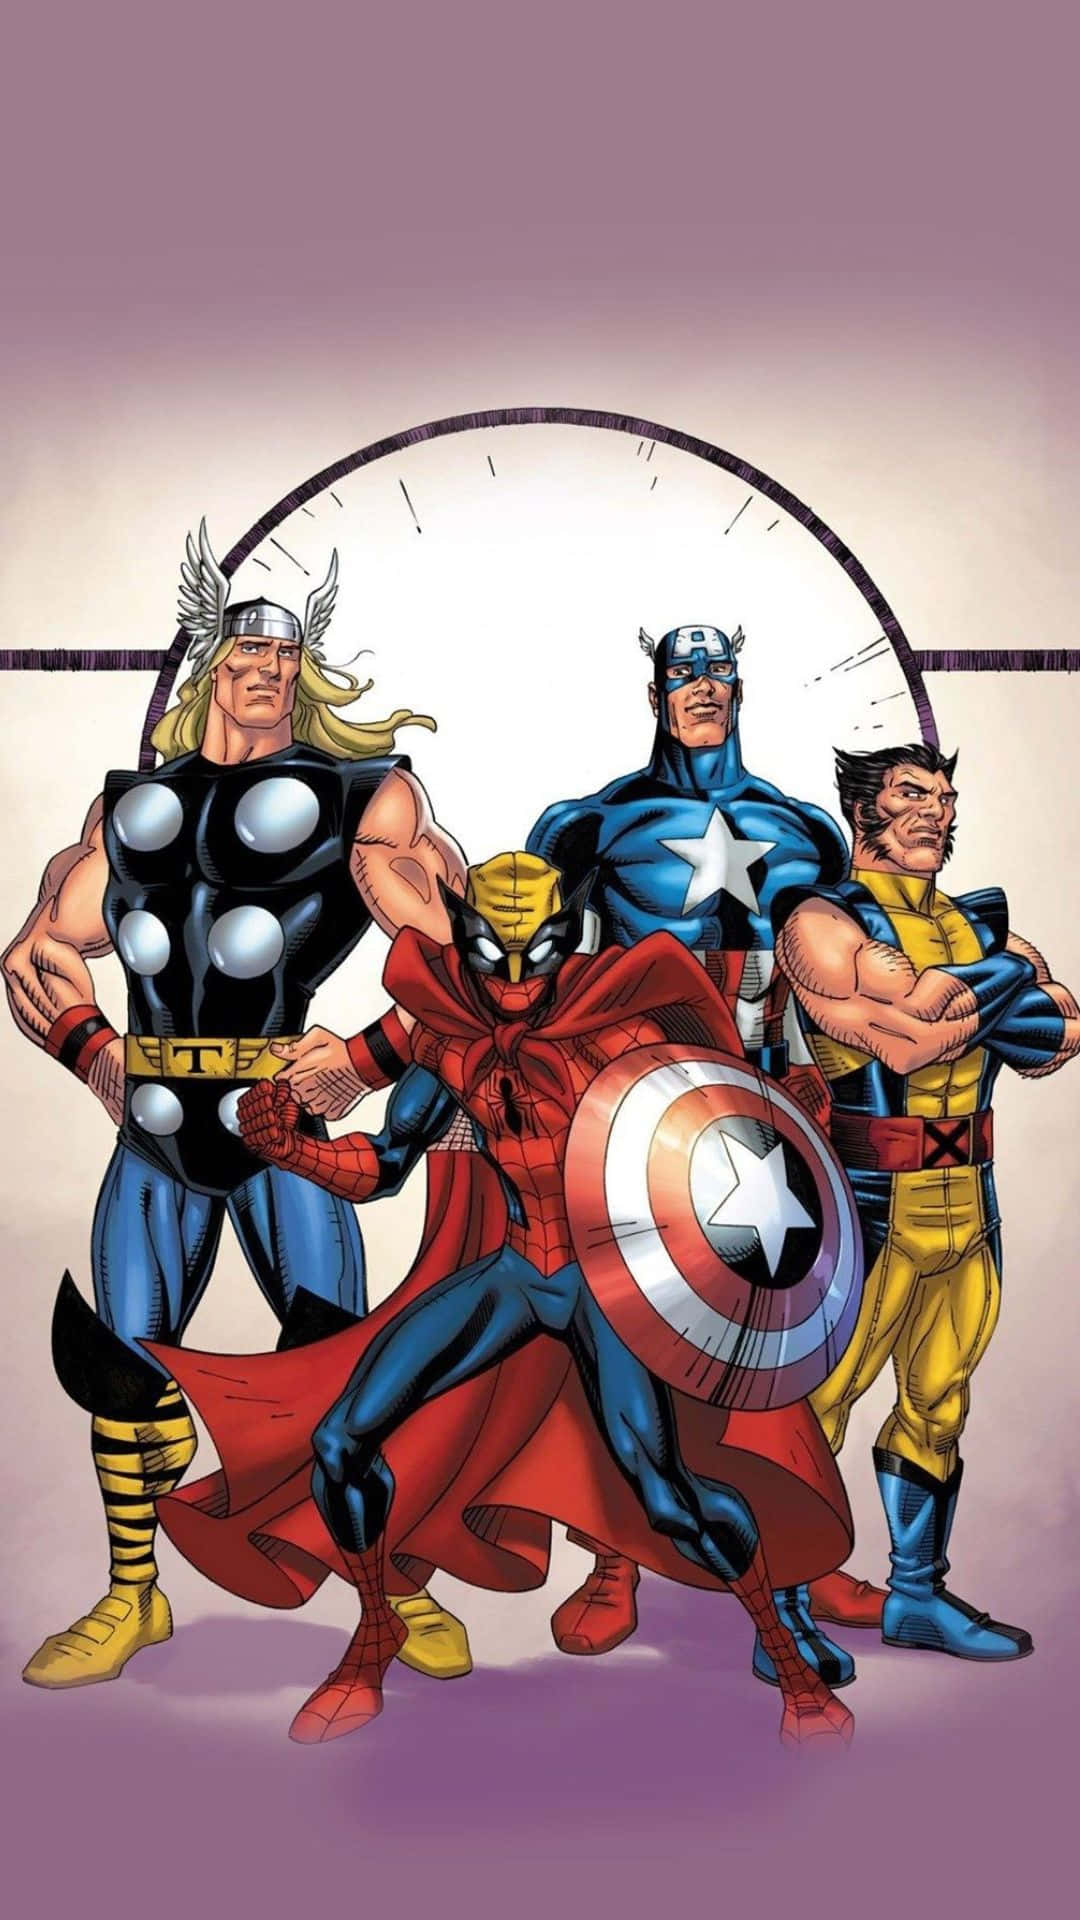 Android Marvel's Avengers Comic Poster Spiderman, Thor, Captain America, Wolverine Background